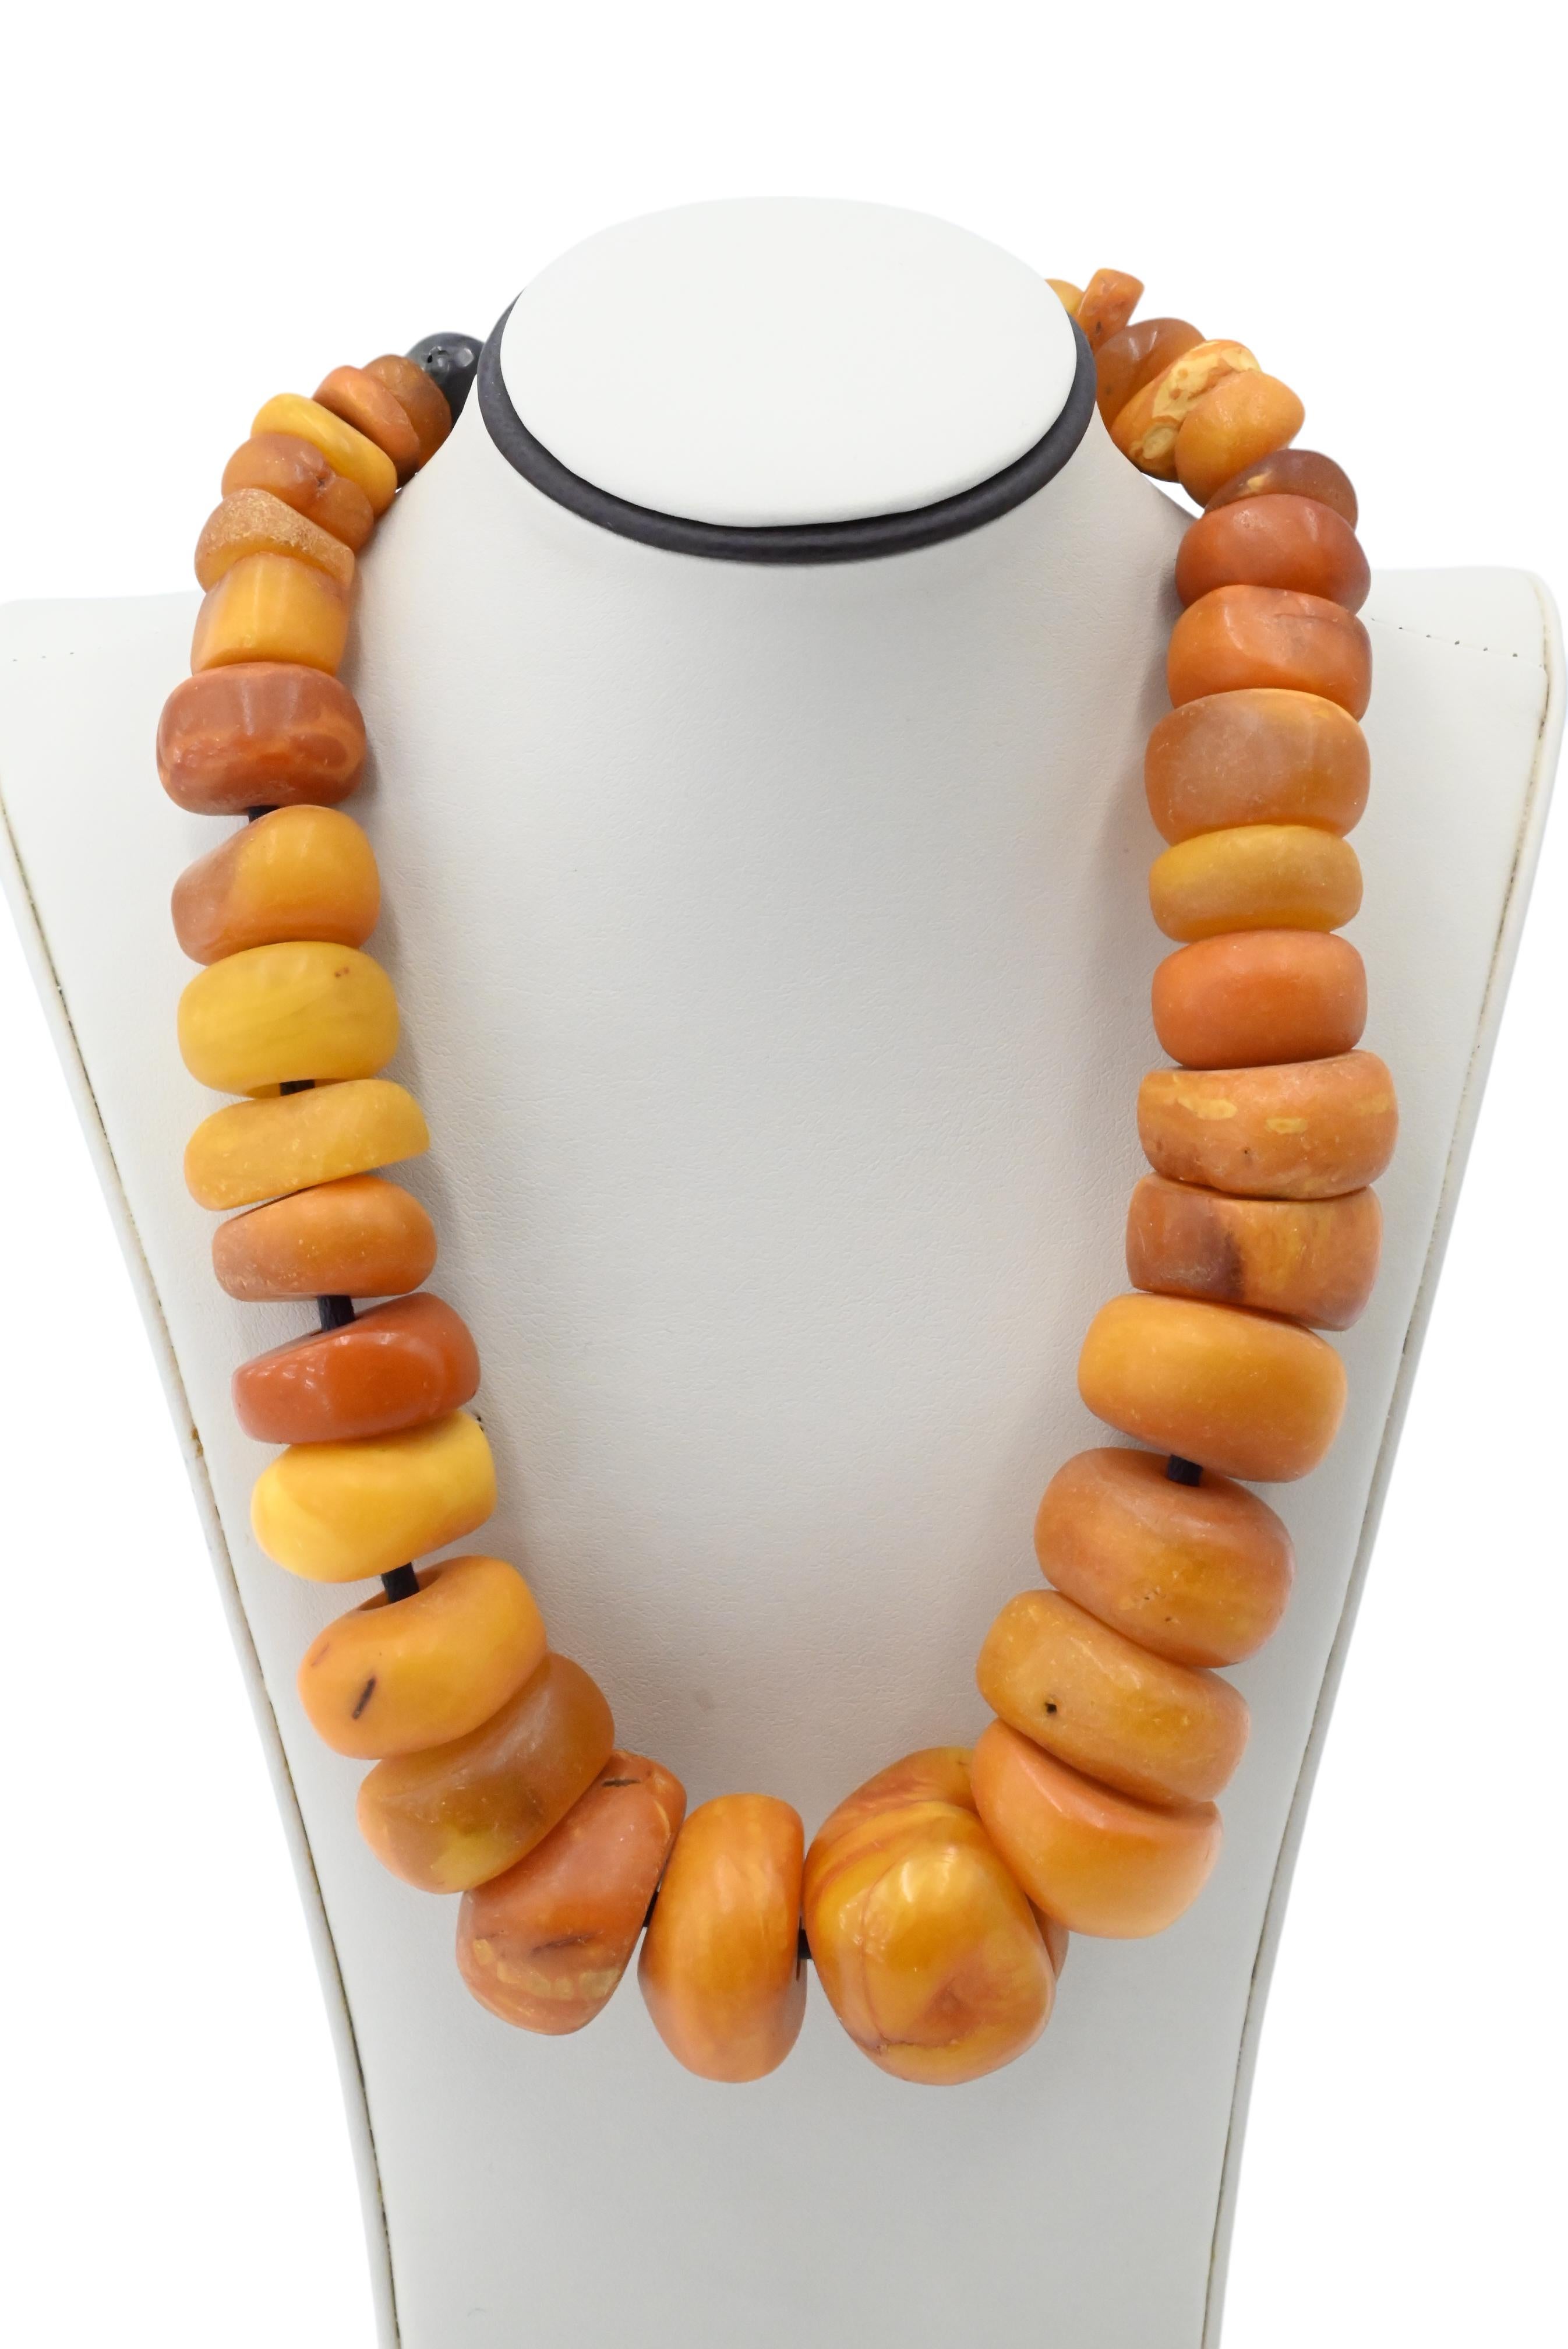 Antique Butterscotch Tibetan Amber Necklace 191 Grams 

ANTIQUE TIBETAN  BUTTERSCOTCH AMBER 
GRADUATED DONUT BEADS
MEASURES 9 1/2 INCHES LONG WHEN CLOSED
TOTAL WEIGHT 191 GRAMS
UNSIGNED - BEADS ARE STRUNG / NOT HAND KNOTTED
BRIGHT CLEAN CONDITION